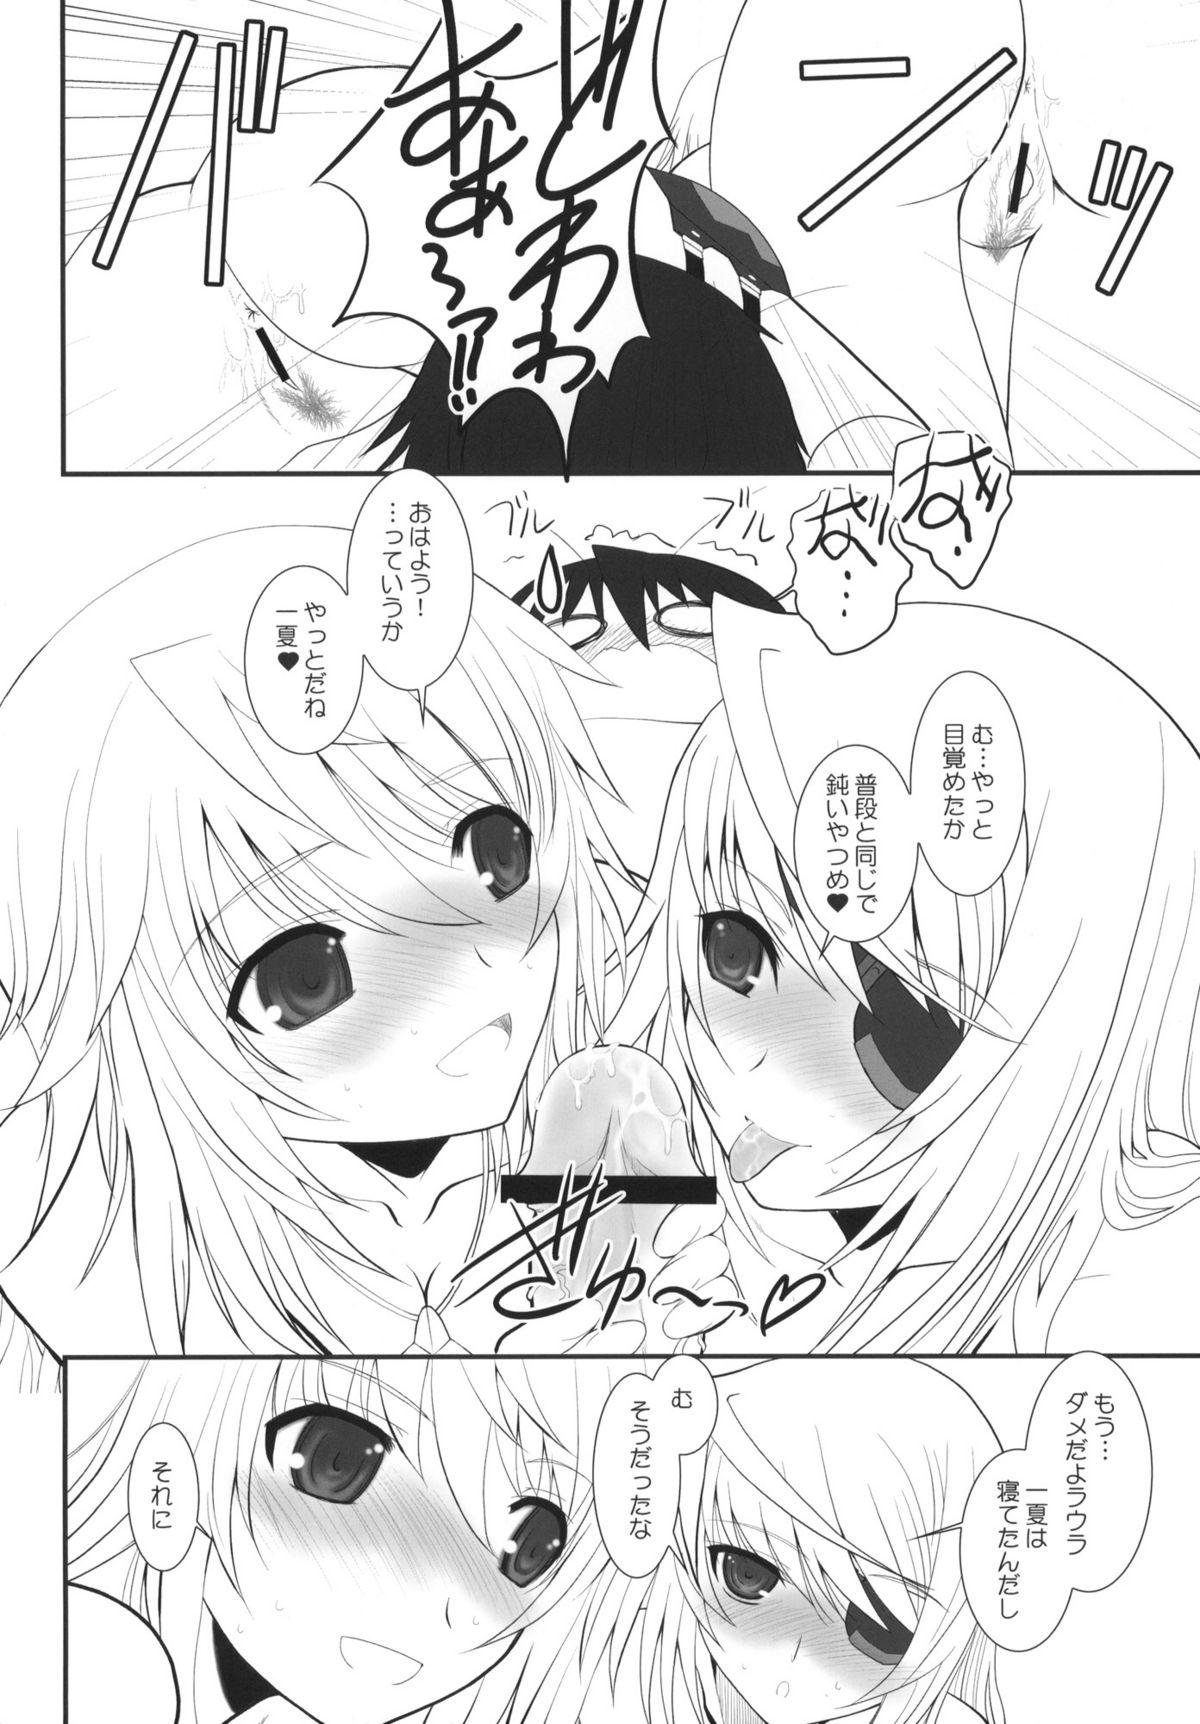 Girls Fucking IS-LAND - Infinite stratos Gets - Page 3